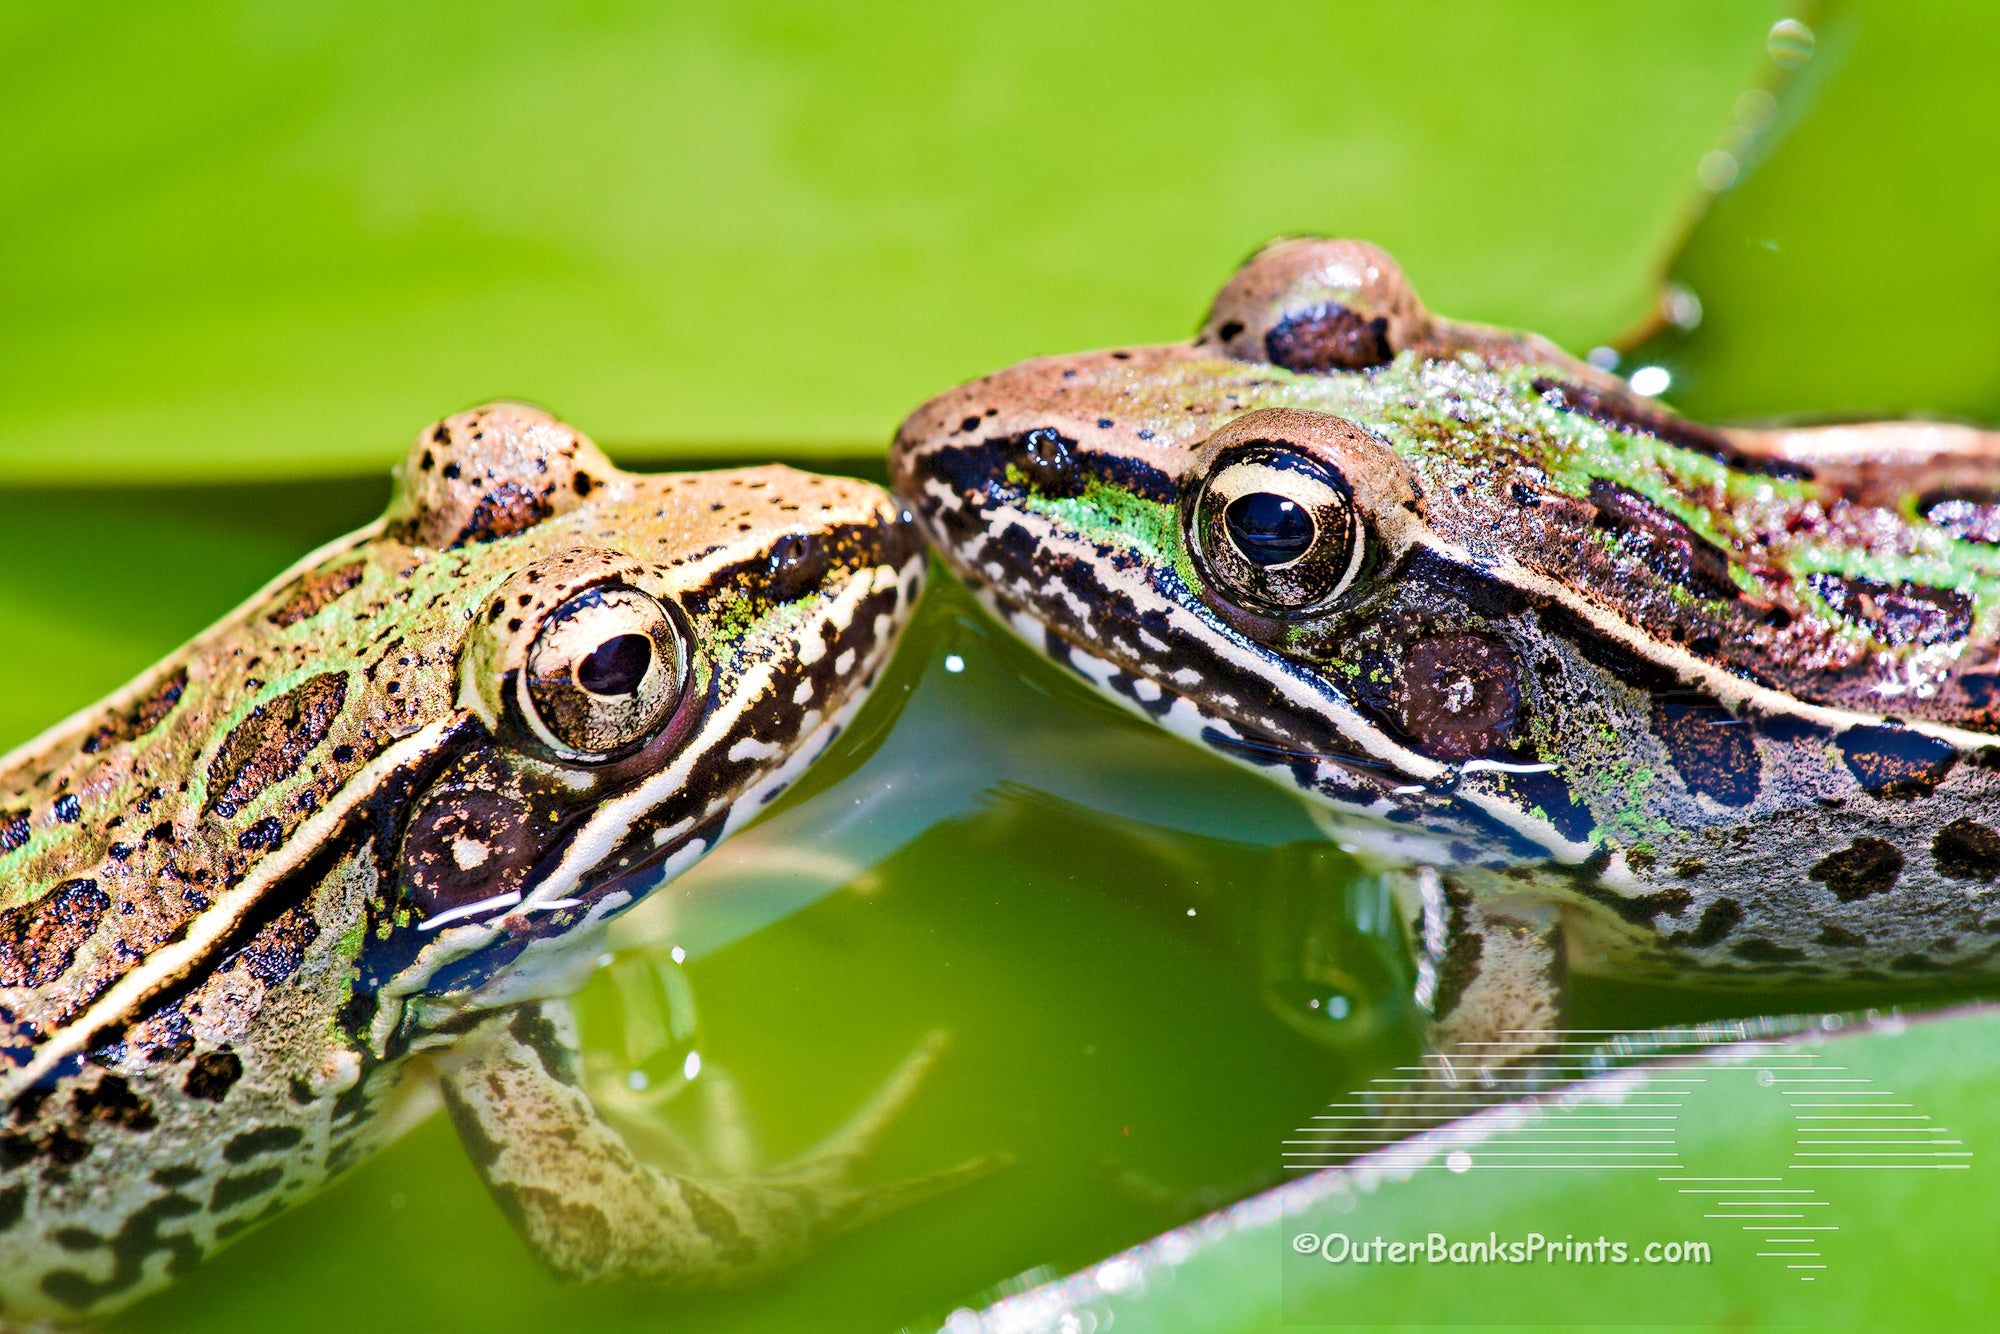 Two frog's photographed in our backyard pond. Our pond is no larger than an oversized puddle, but we are pleasantly surprised at the amount of wildlife it attracts.